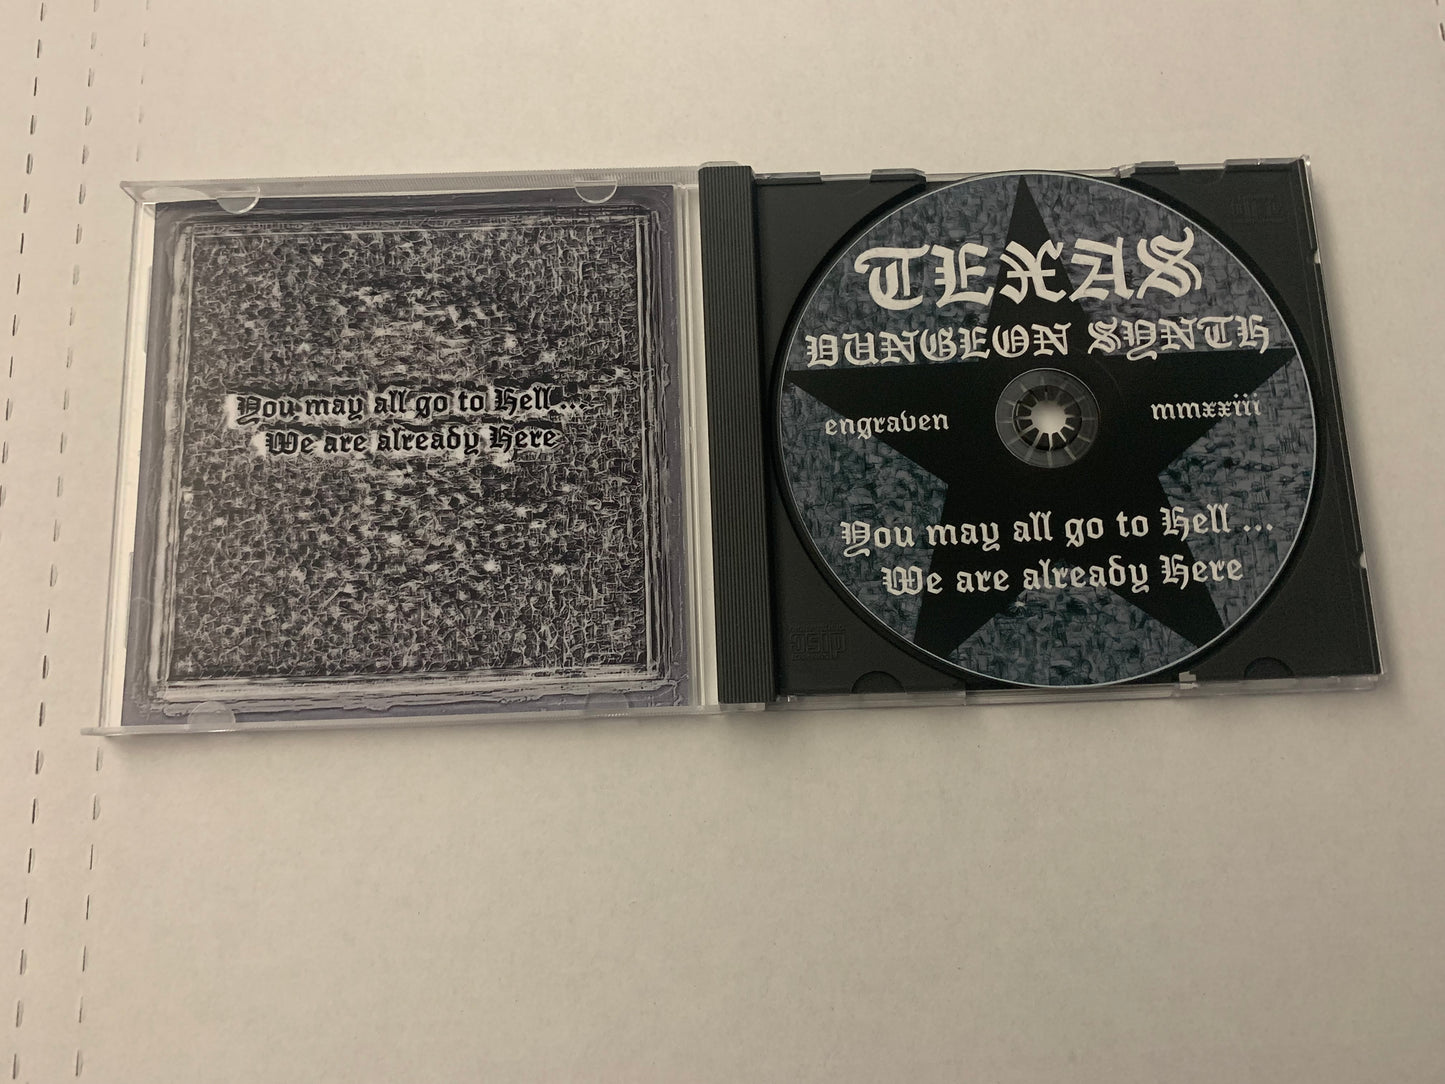 Various Artists - Texas Dungeon Synth [Dungeon Synth] (Engraven - CD - 10/31/23)